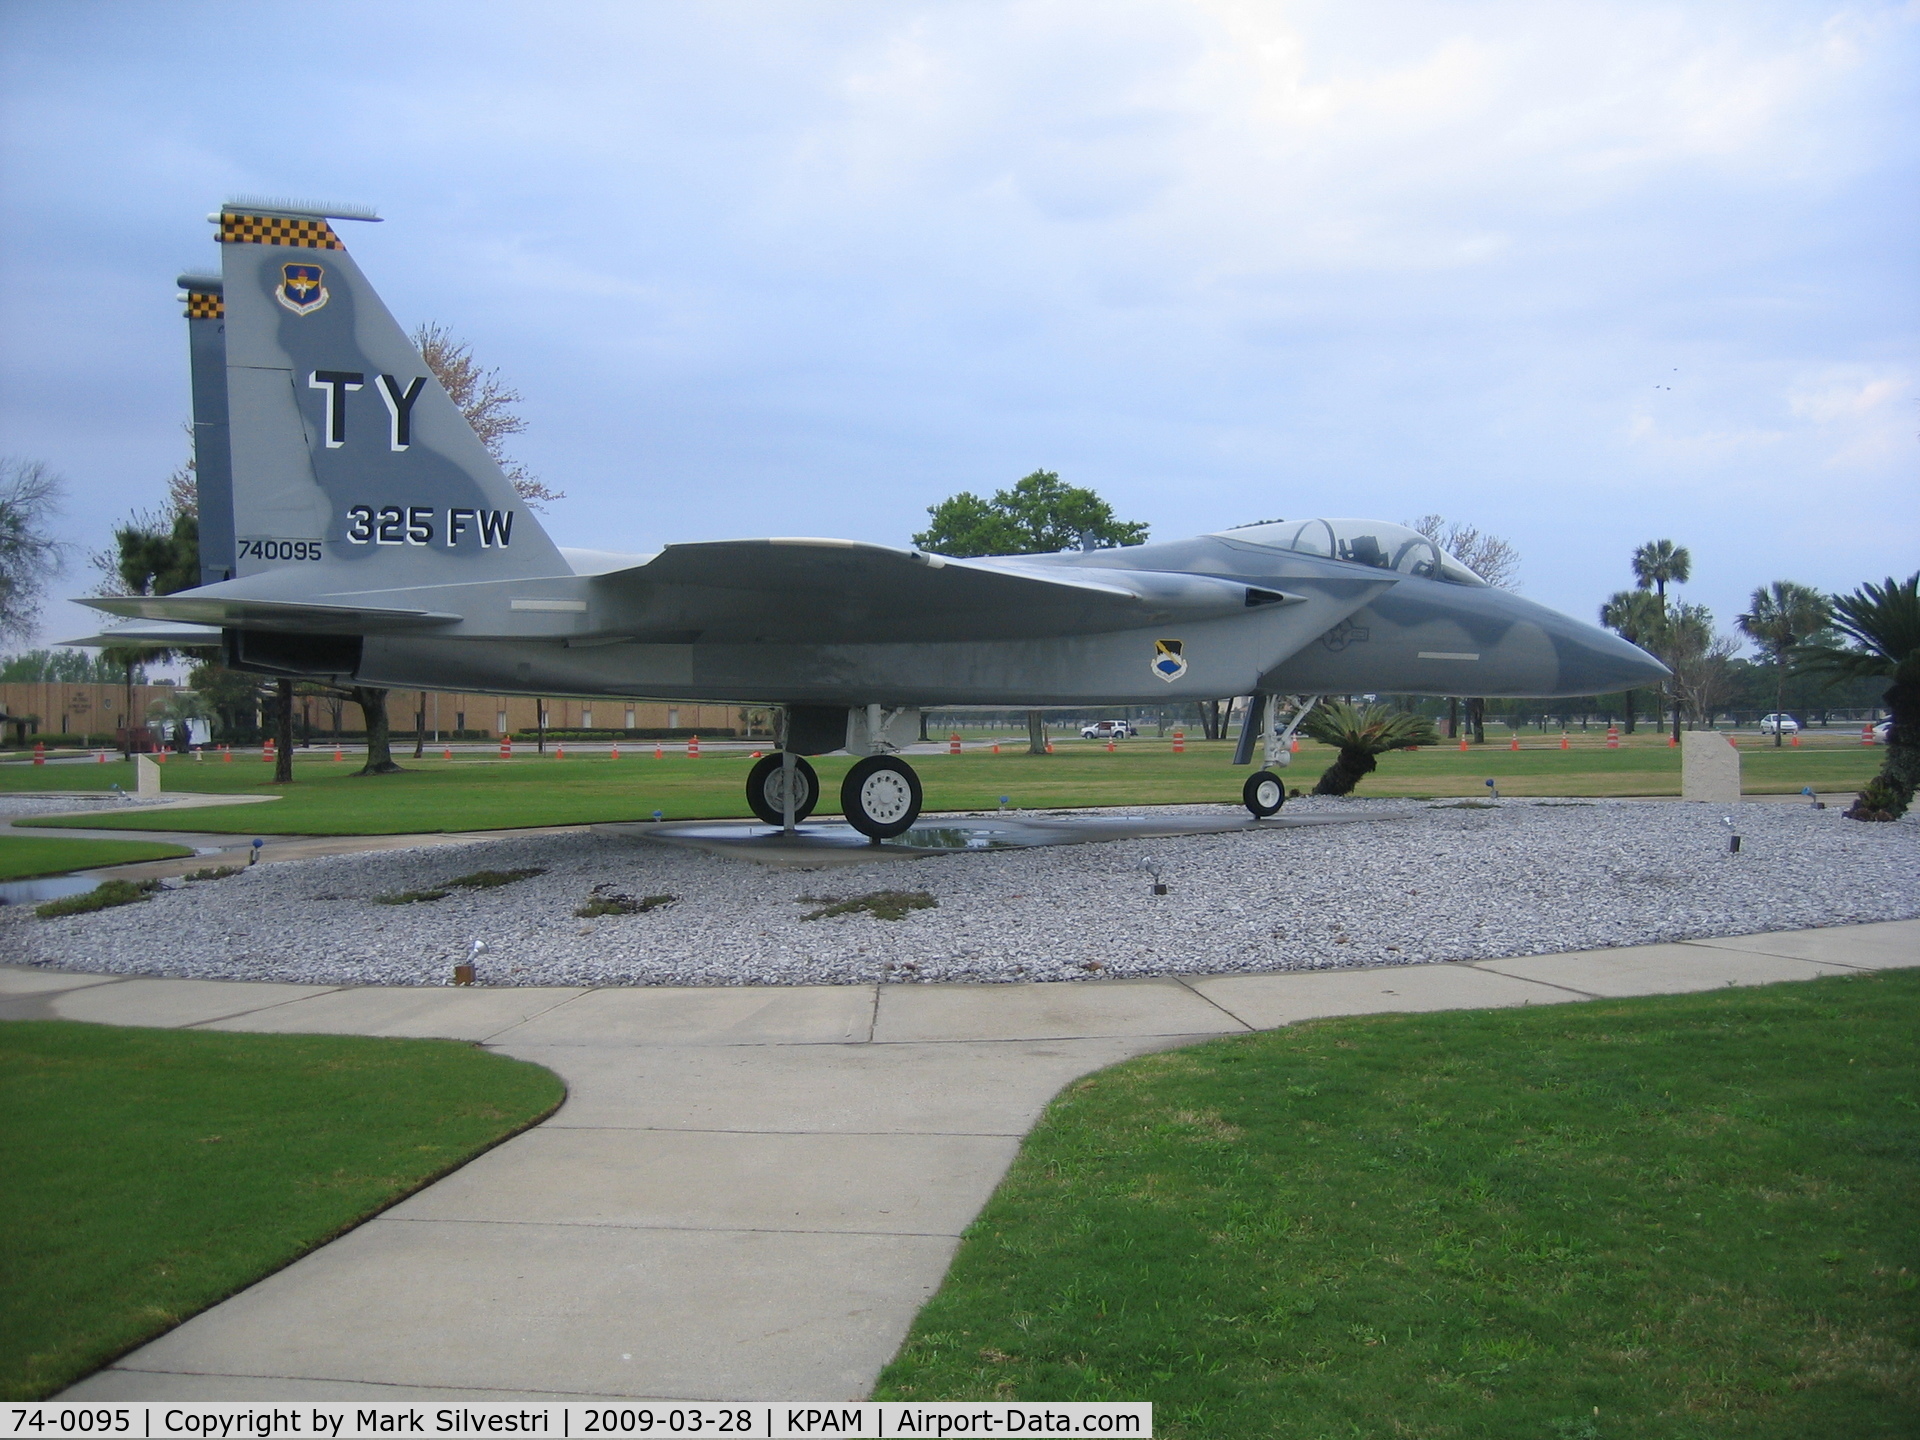 74-0095, 1974 McDonnell Douglas F-15A Eagle C/N 0069/A056, On Display at Tyndall AFB